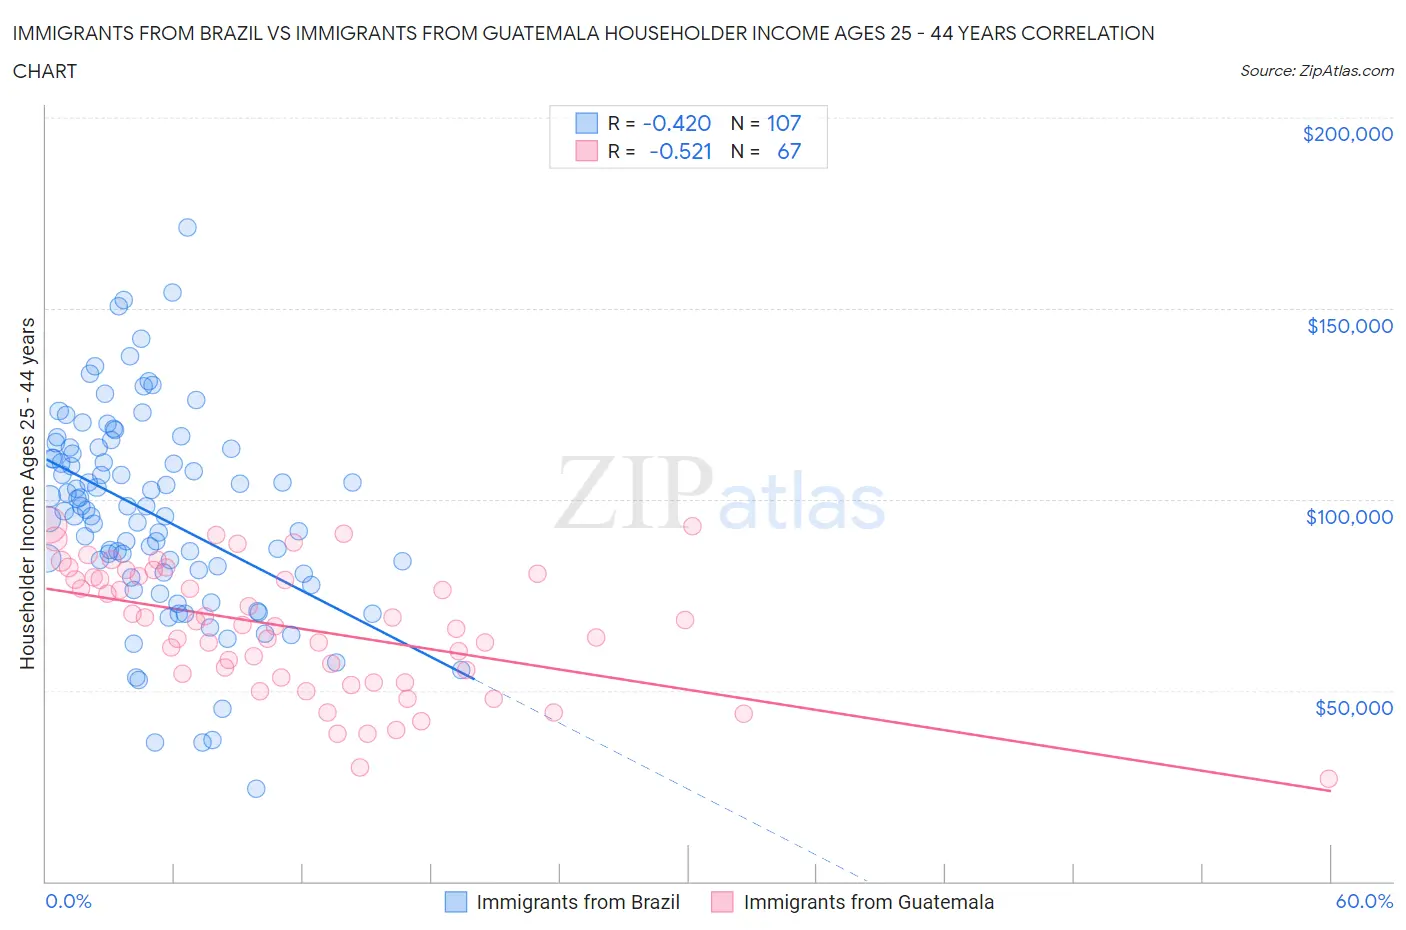 Immigrants from Brazil vs Immigrants from Guatemala Householder Income Ages 25 - 44 years